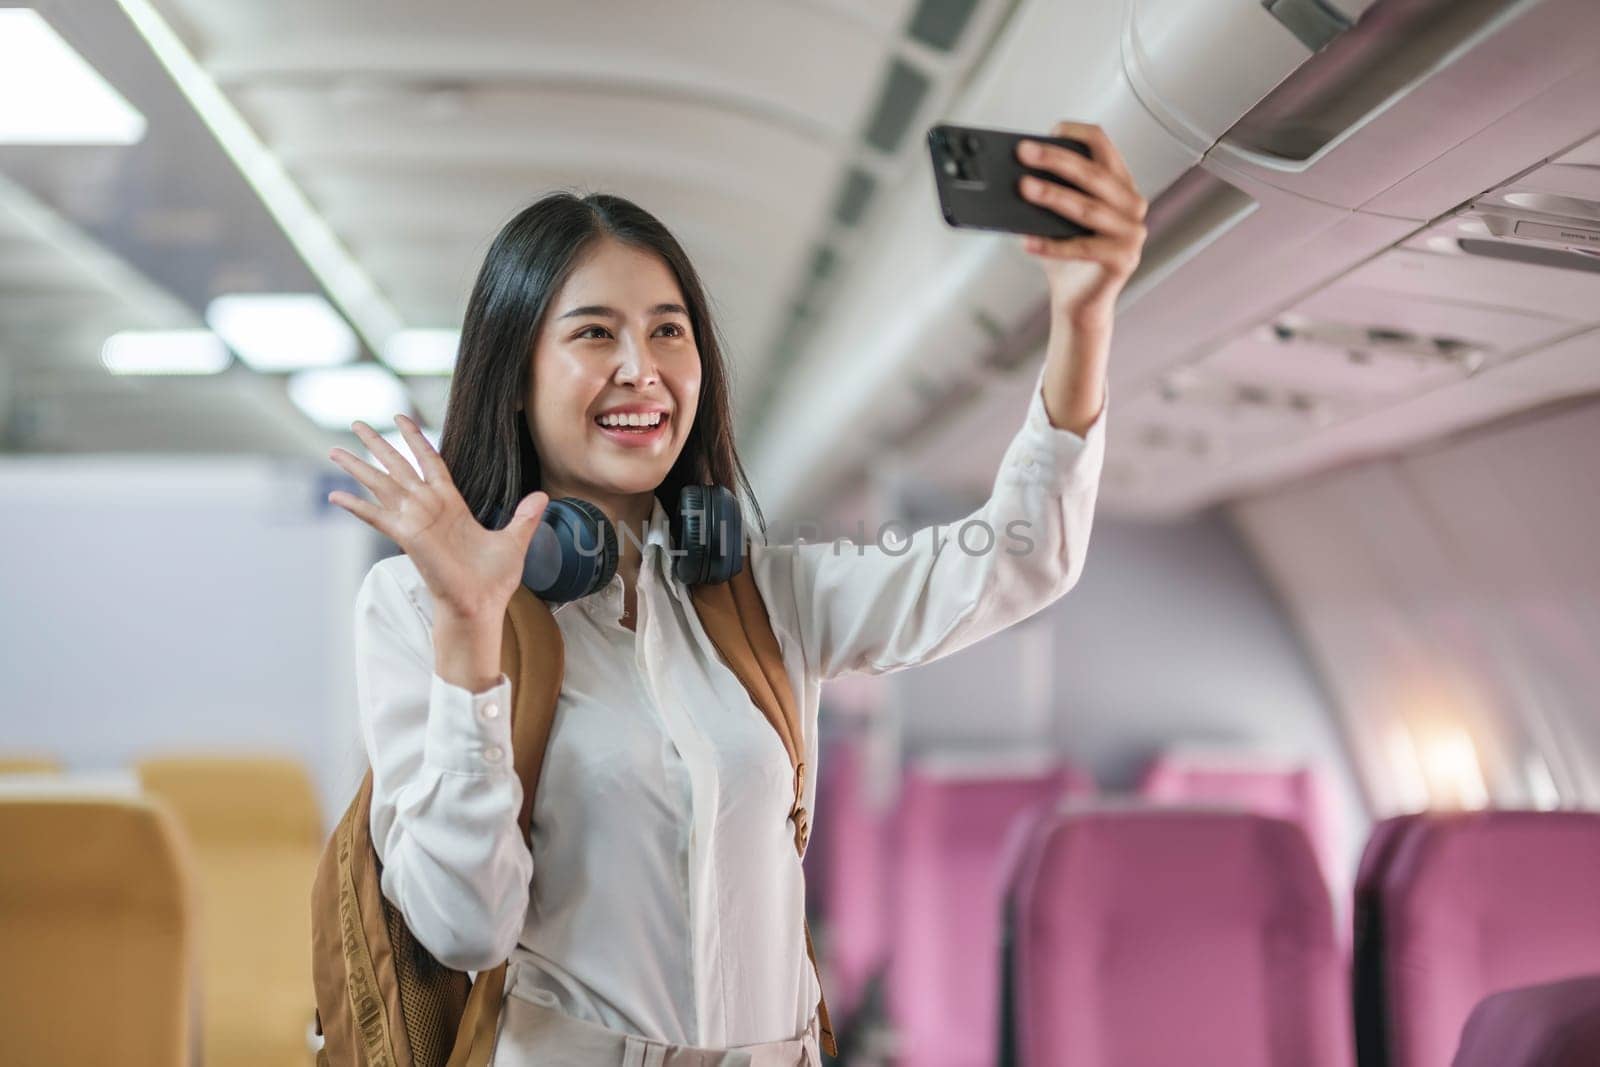 Portrait of an Asian woman taking a selfie or capturing memories while waiting for an economy class flight. Travel concept, vacations, tourism..